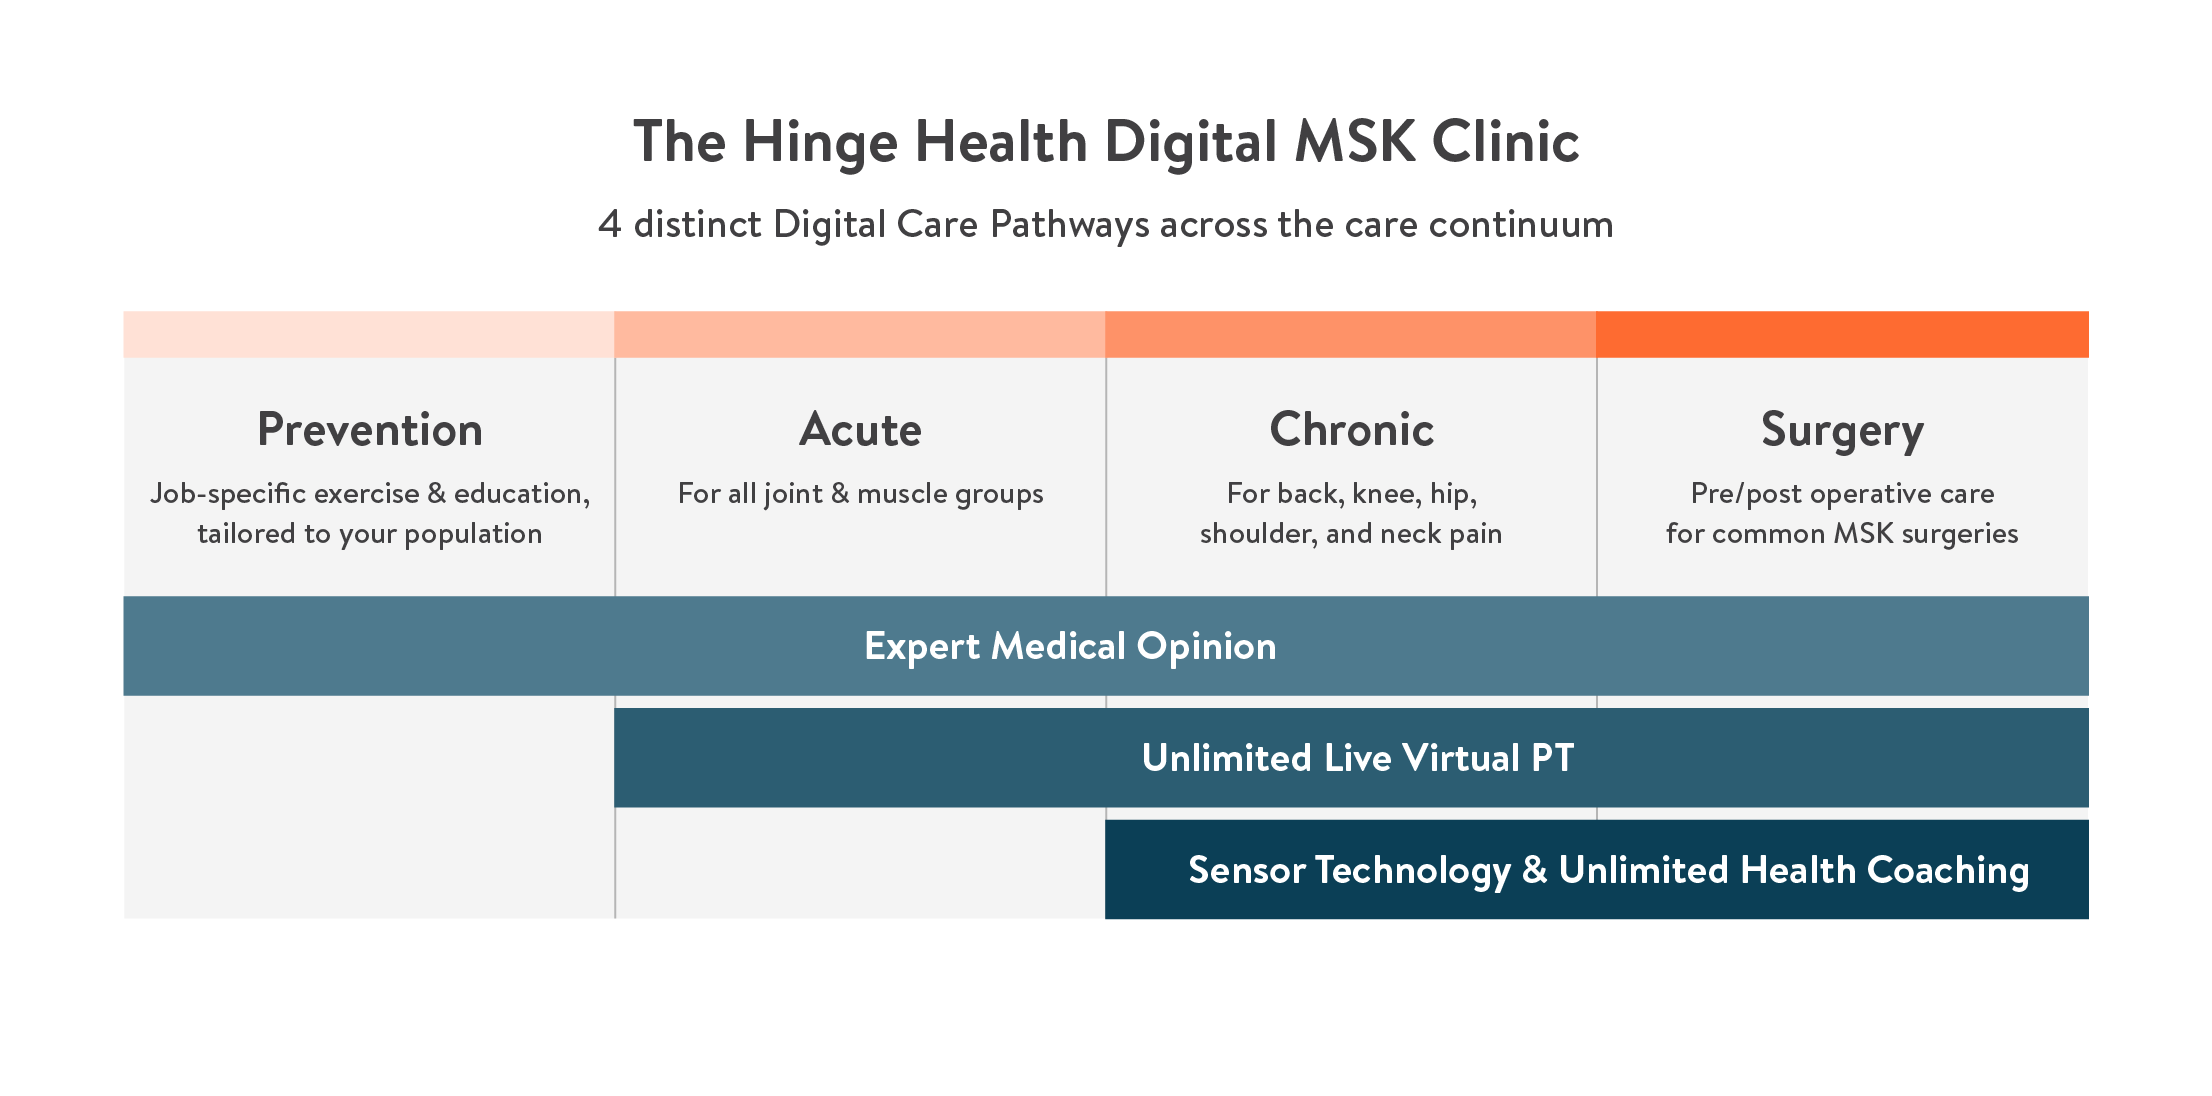 Hinge Health uses 4 distinct pathways to address MSK conditions including care for prevention, acute conditions, chronic conditions, and pre/post operative care.